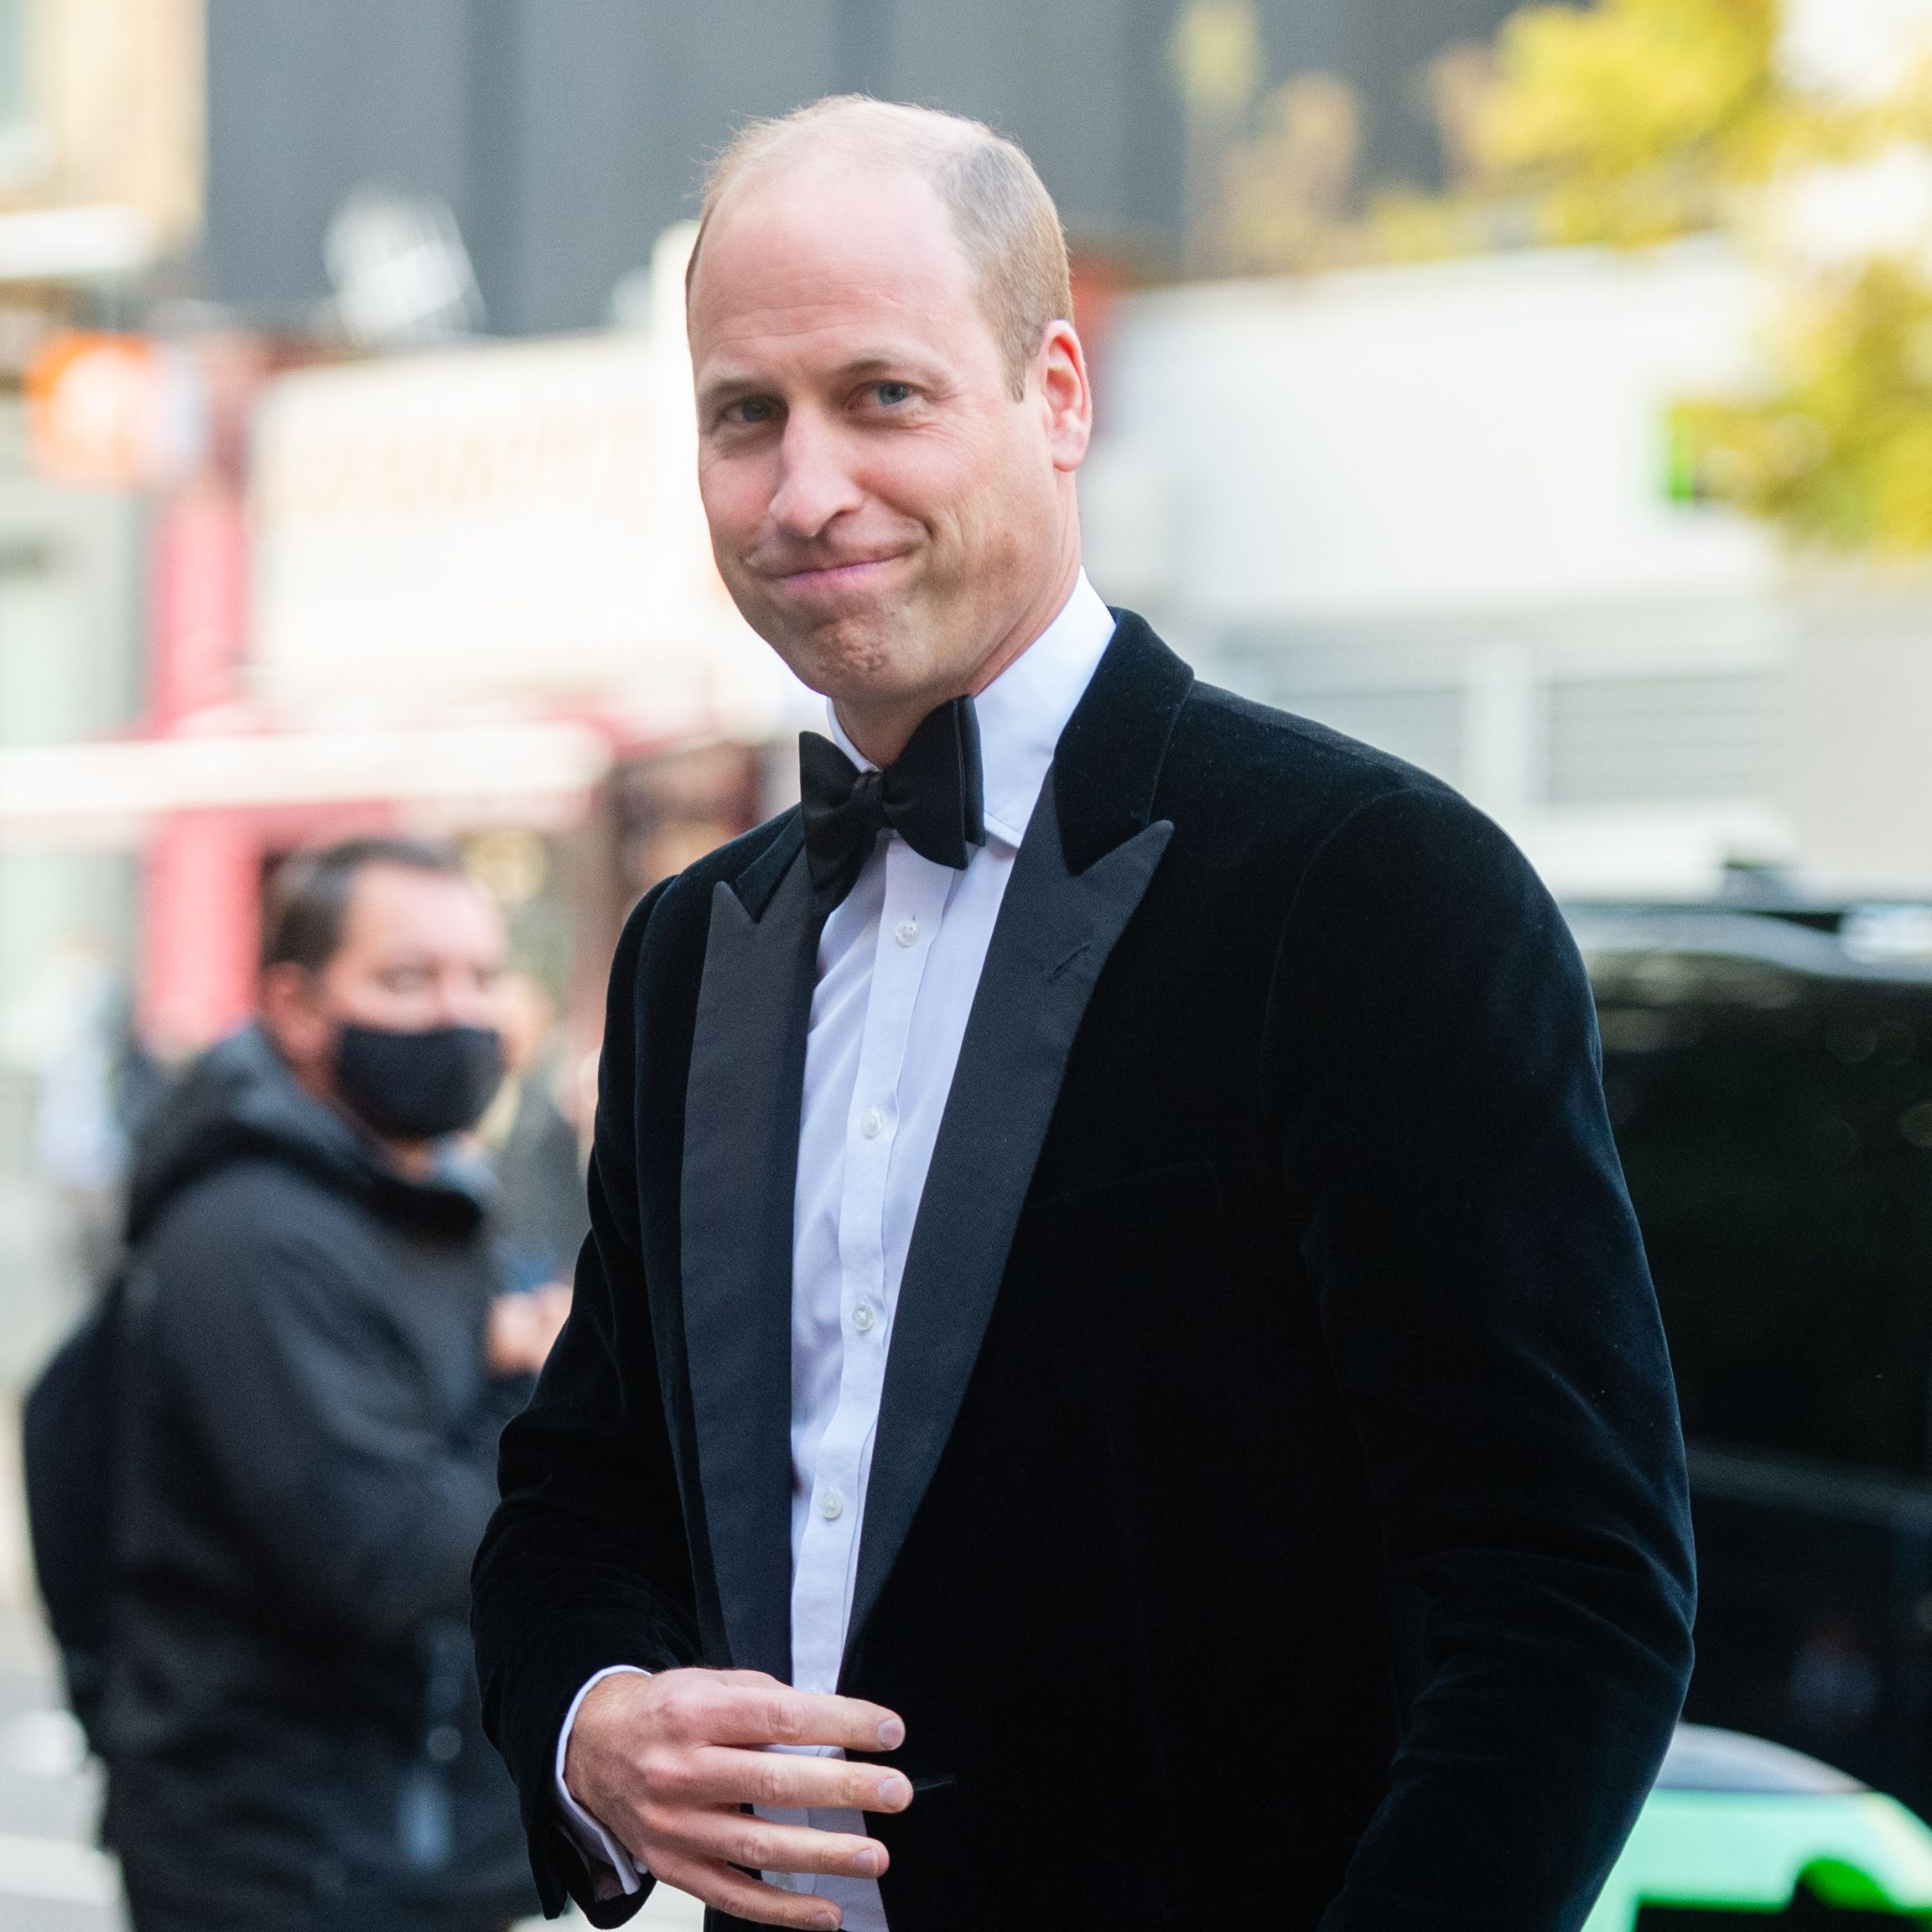 'The Crown' Is Casting an Actor to Play Prince William and It's a 